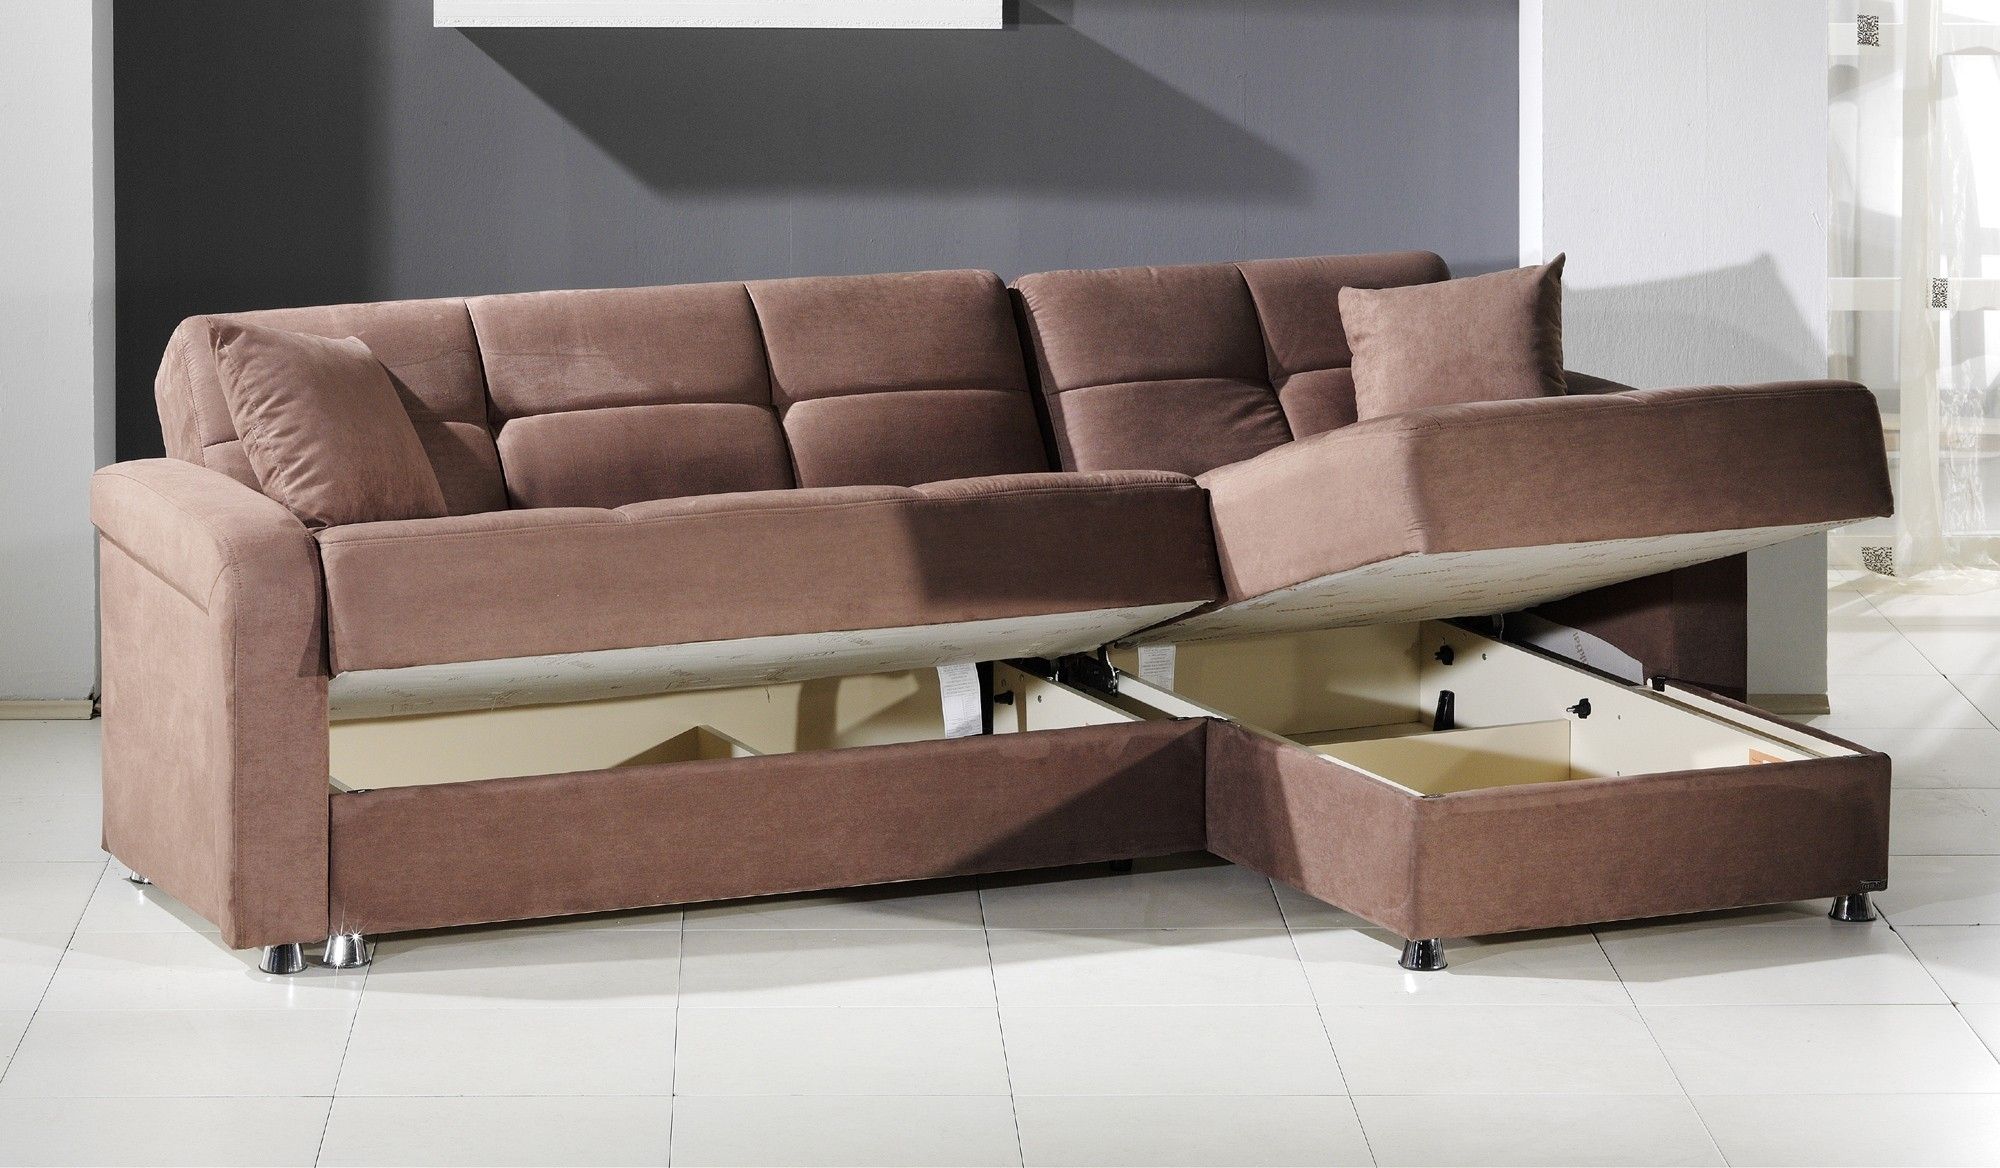 Simple Sectional Sofas With Storage 82 About Remodel Leather Sofa Regarding Sectional Sofas With Storage (Photo 6185 of 7825)